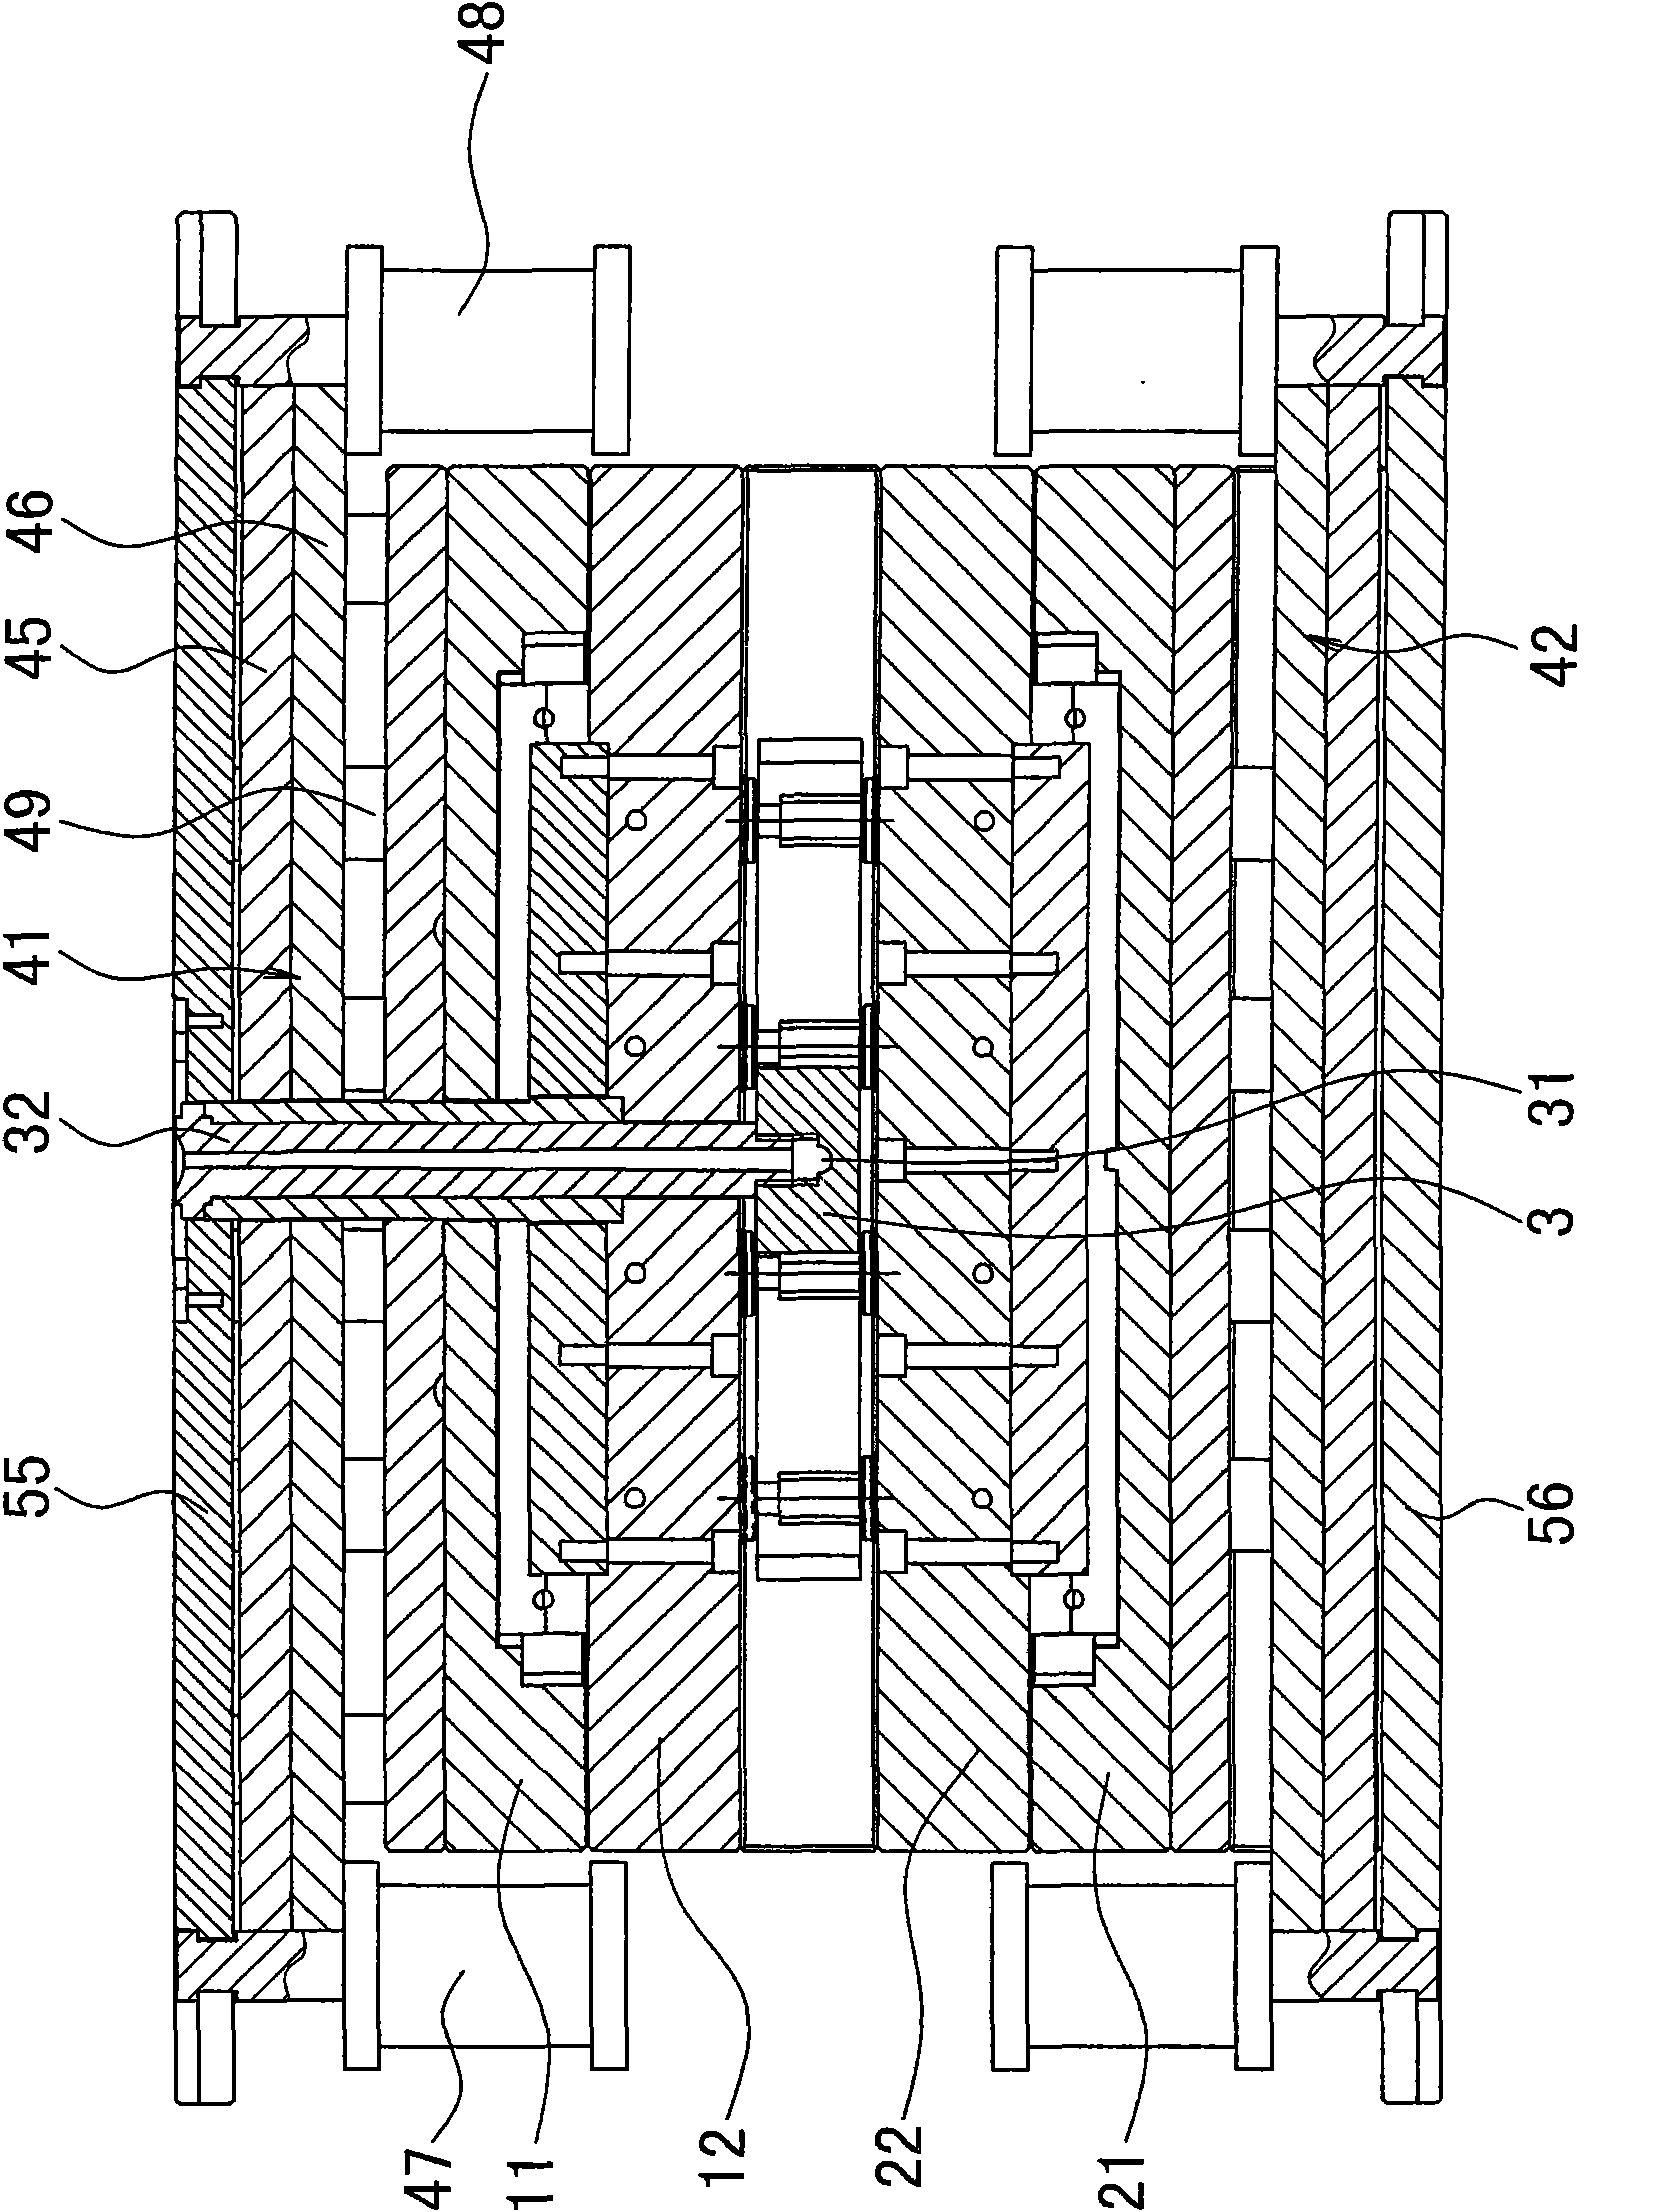 Double-layer injection mold